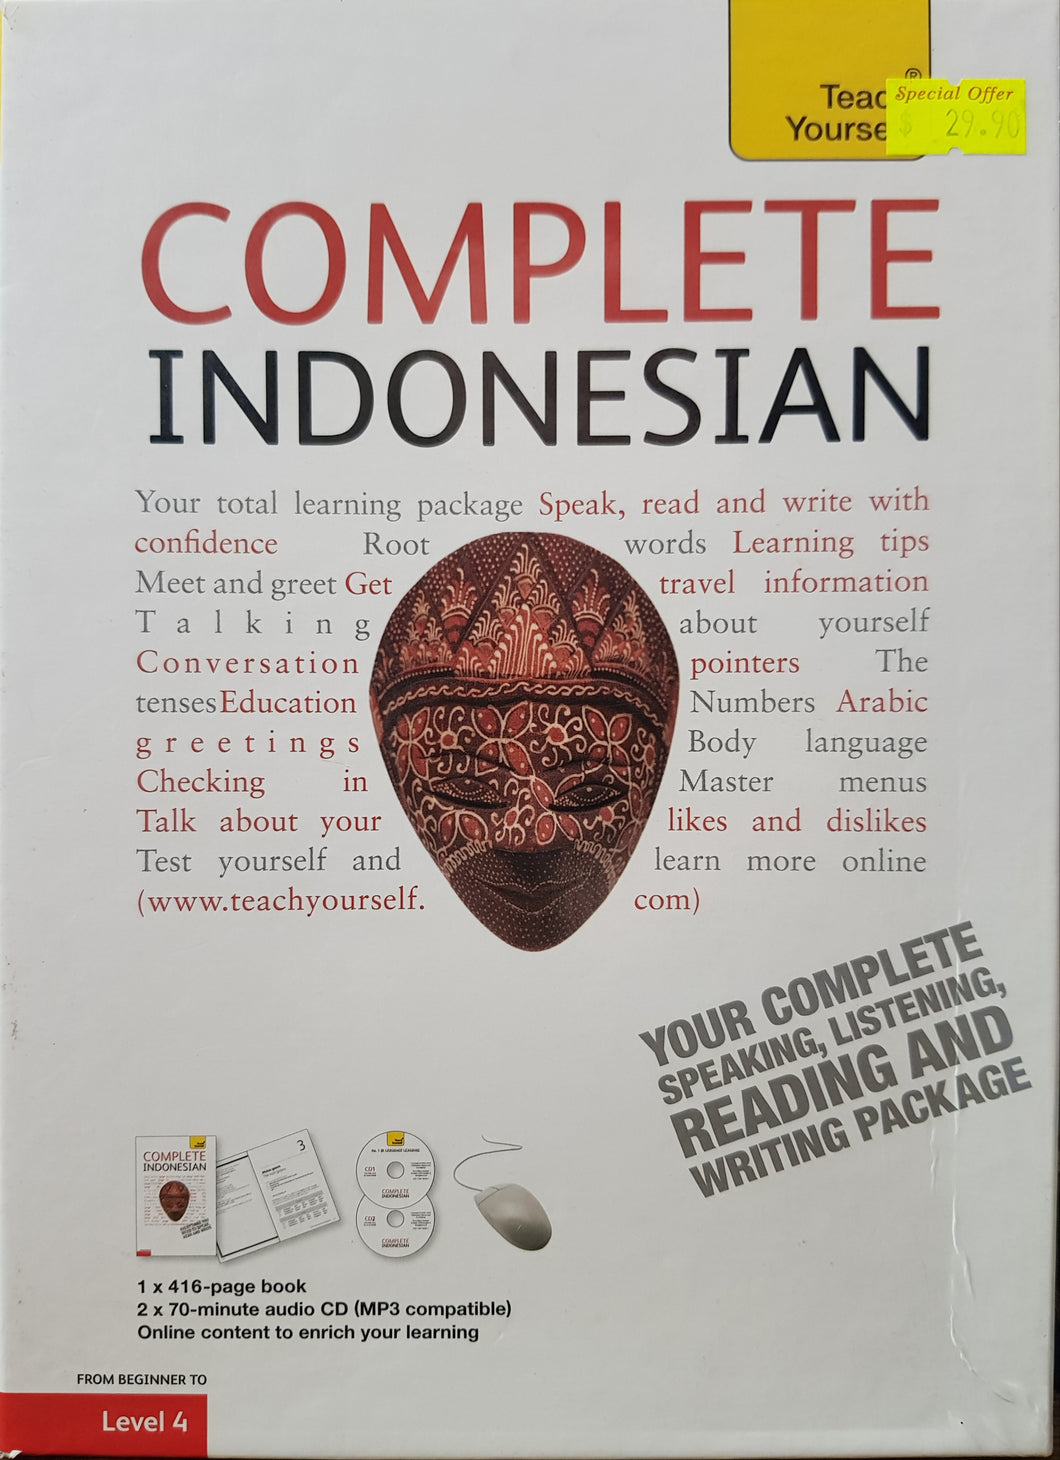 Complete Indonesian (Book and audio support) -  Eva Nyimas & Christopher Byrnes